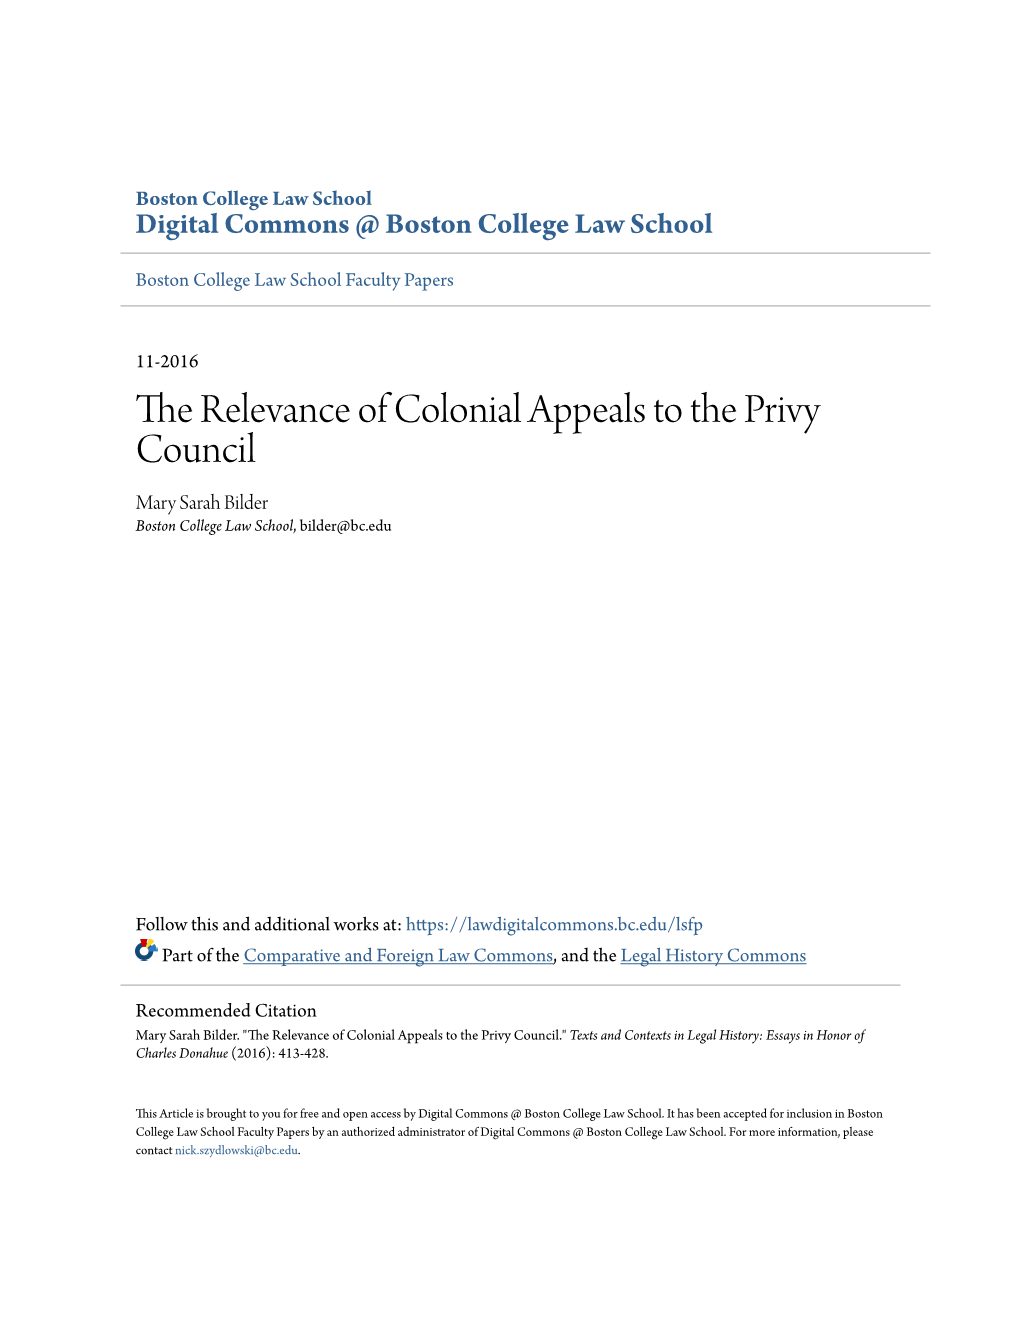 The Relevance of Colonial Appeals to the Privy Council Mary Sarah Bilder Boston College Law School, Bilder@Bc.Edu